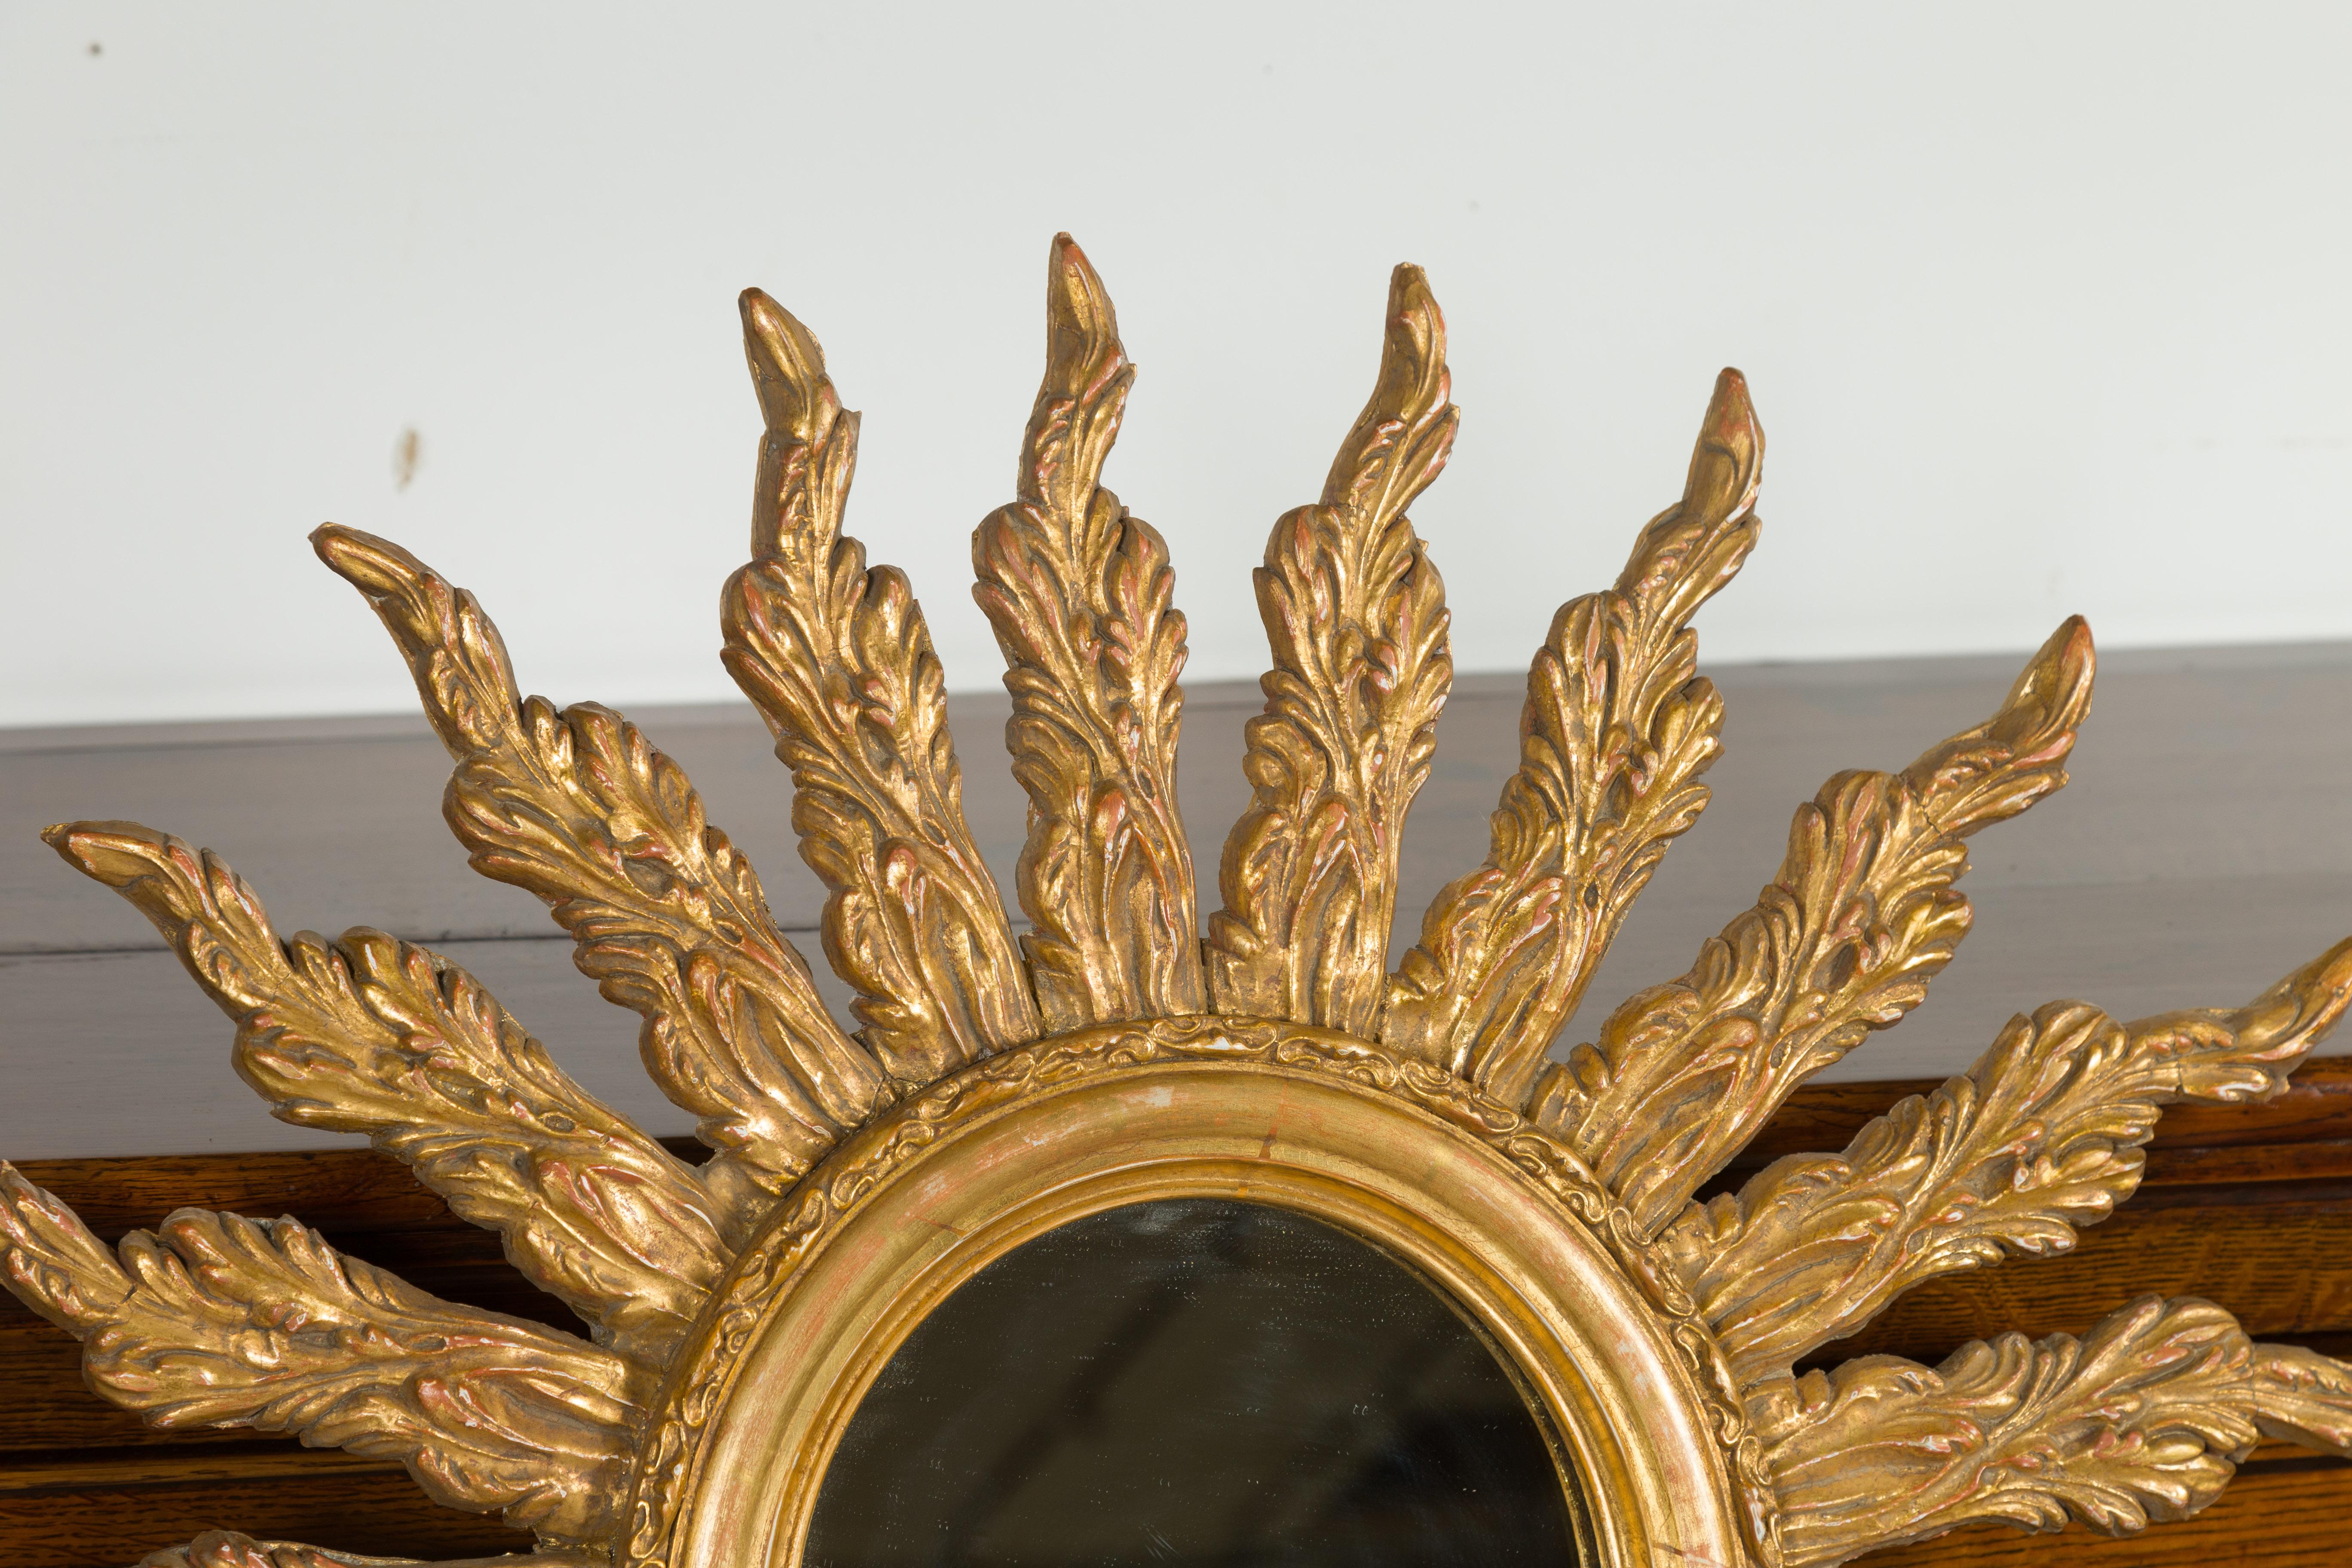 Carved French Giltwood Sunburst Mirror with Wavy Sunrays from the Mid-20th Century For Sale